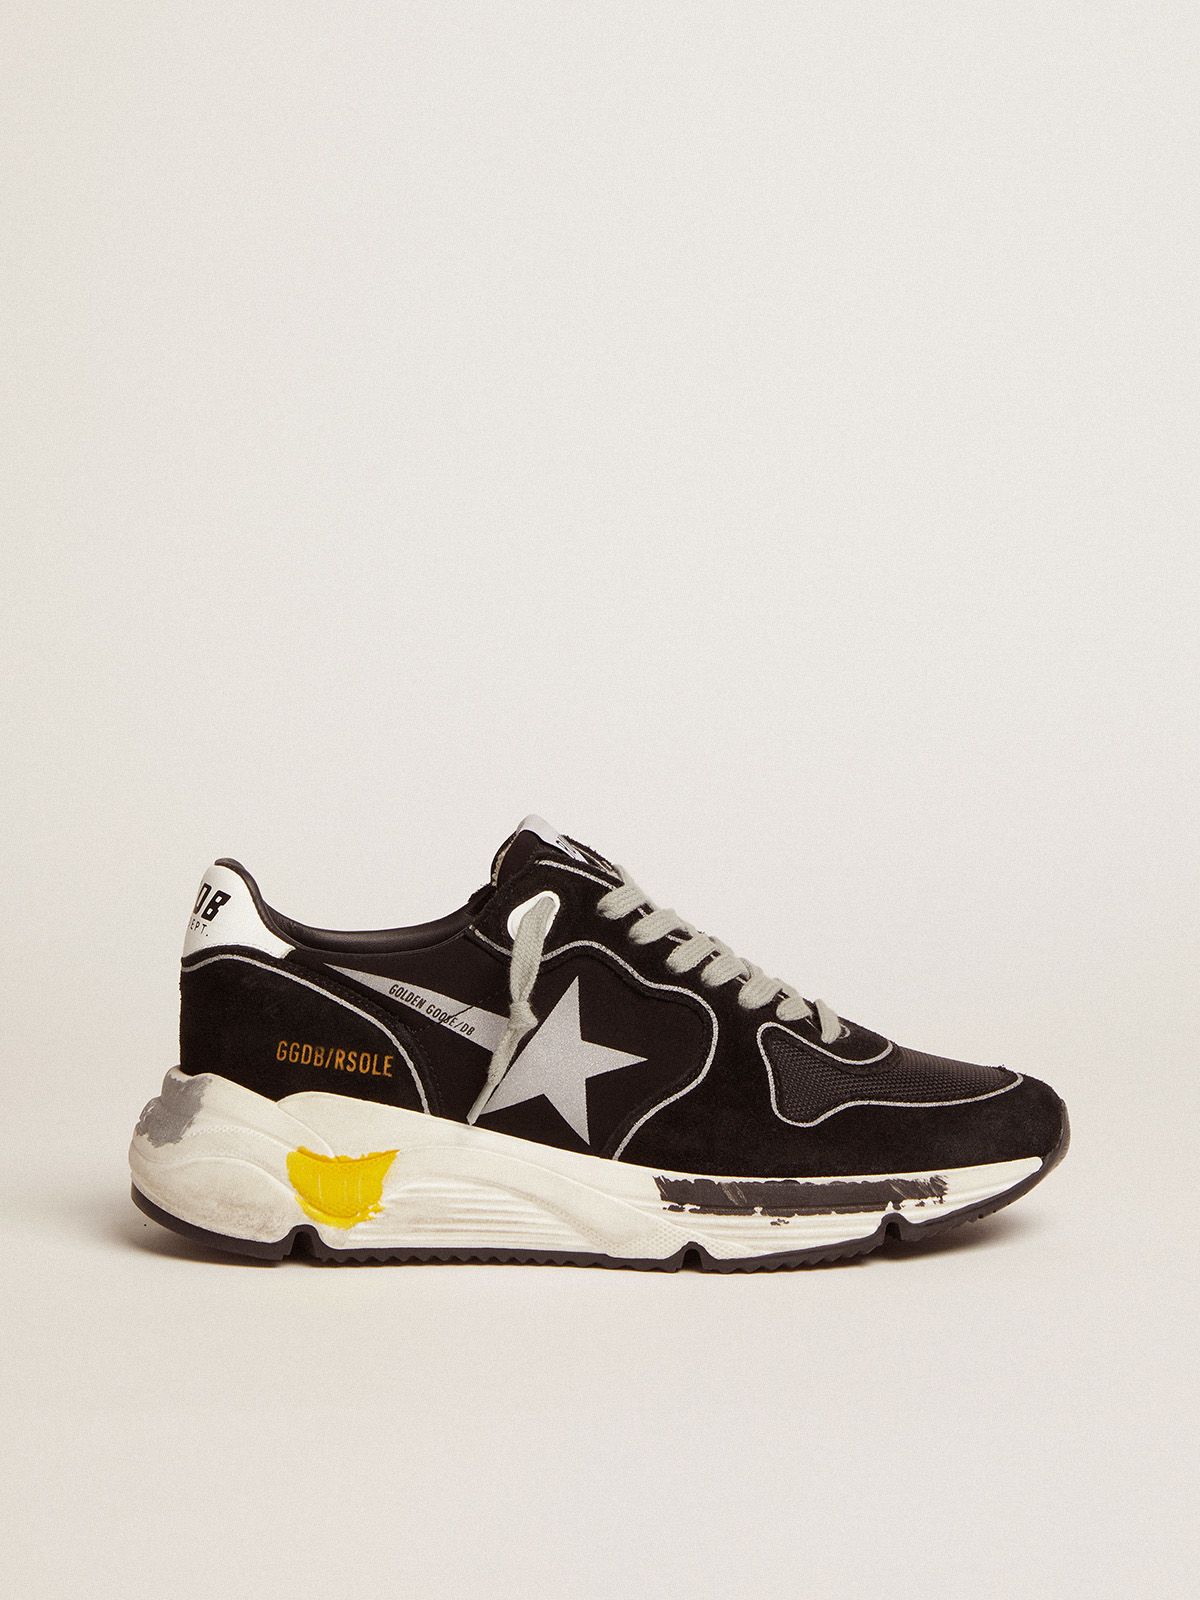 Golden Goose Ball Star Uomo Black Running Sole sneakers with silver star